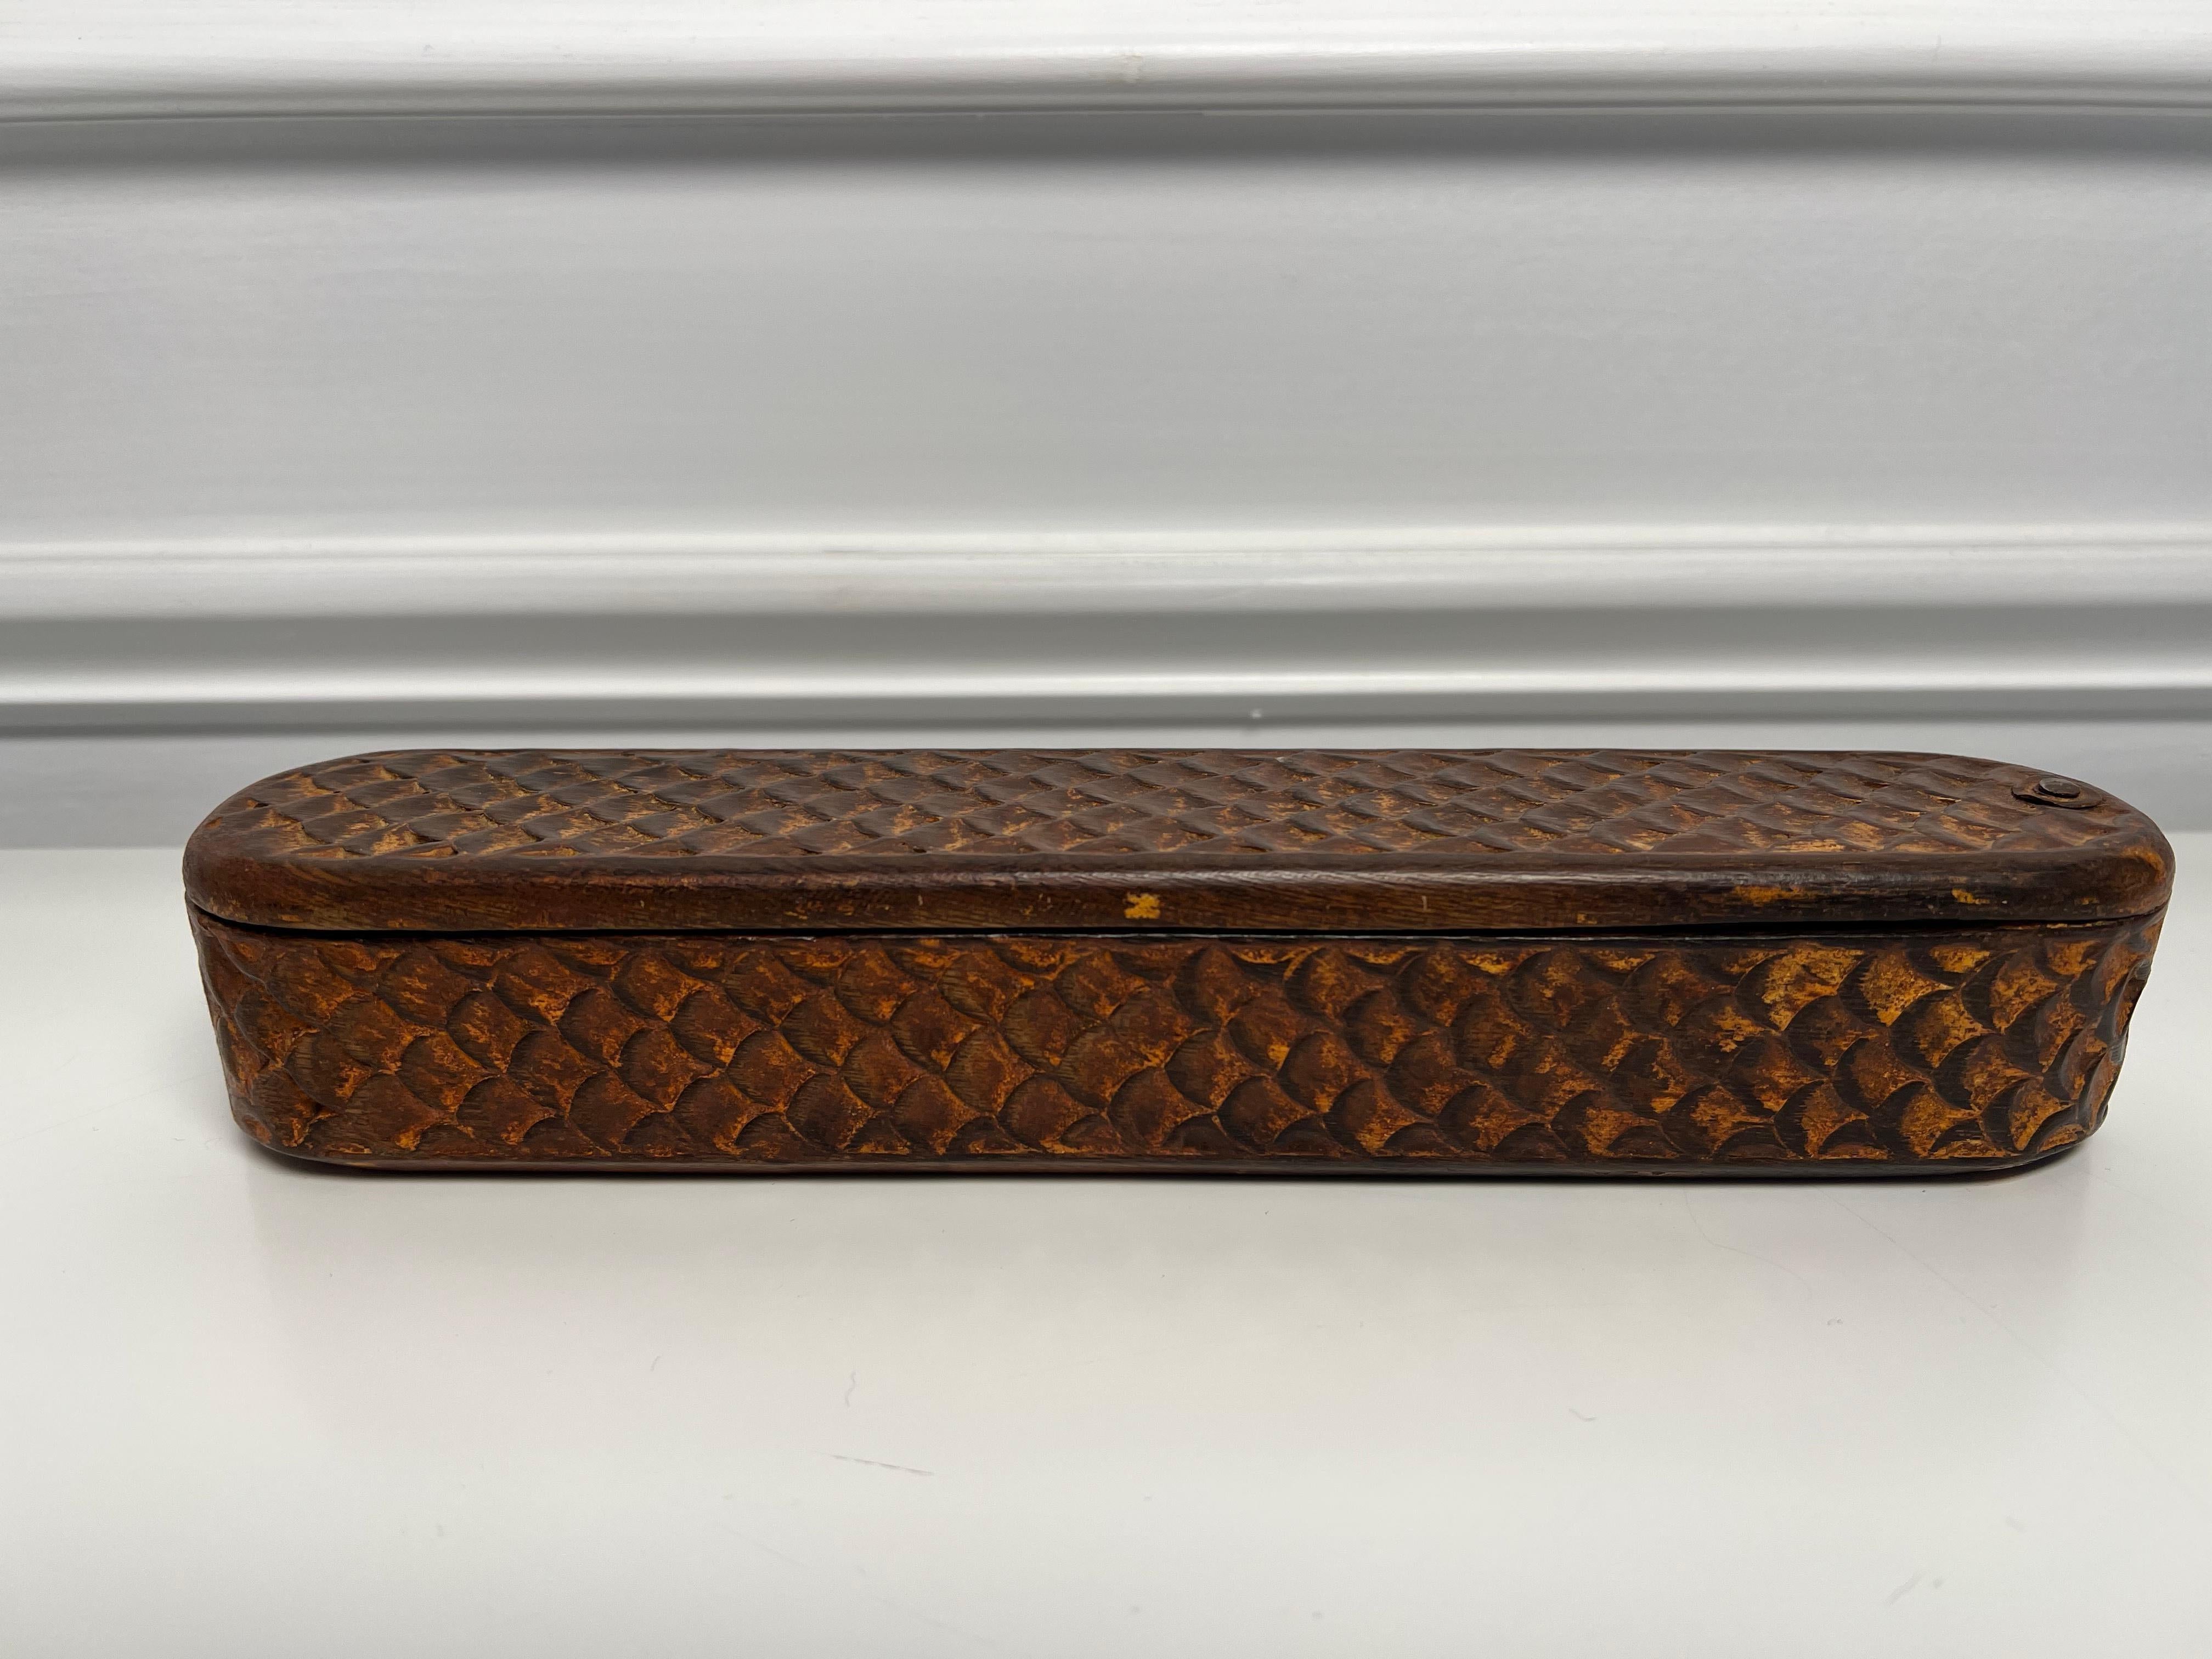 Early 19th Century hand carved wooden pen box with a swing top and space for an ink well and pens. French circa 1910 this would be a nice piece for someone who collects ink wells or antique pens. Its one of the many pieces from a private collector